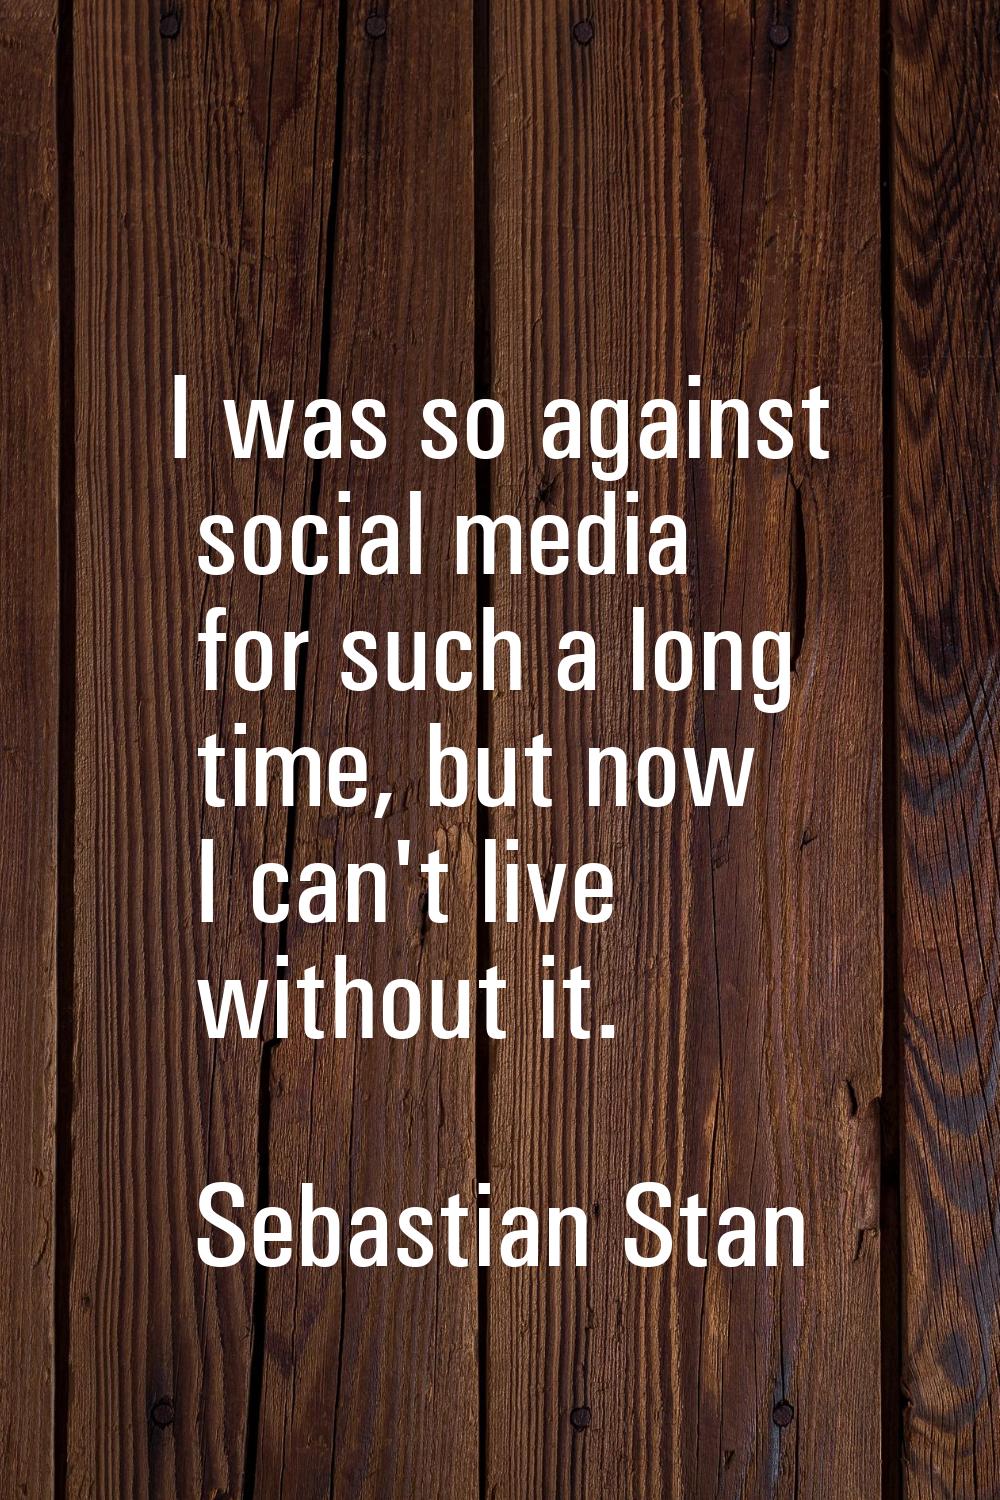 I was so against social media for such a long time, but now I can't live without it.